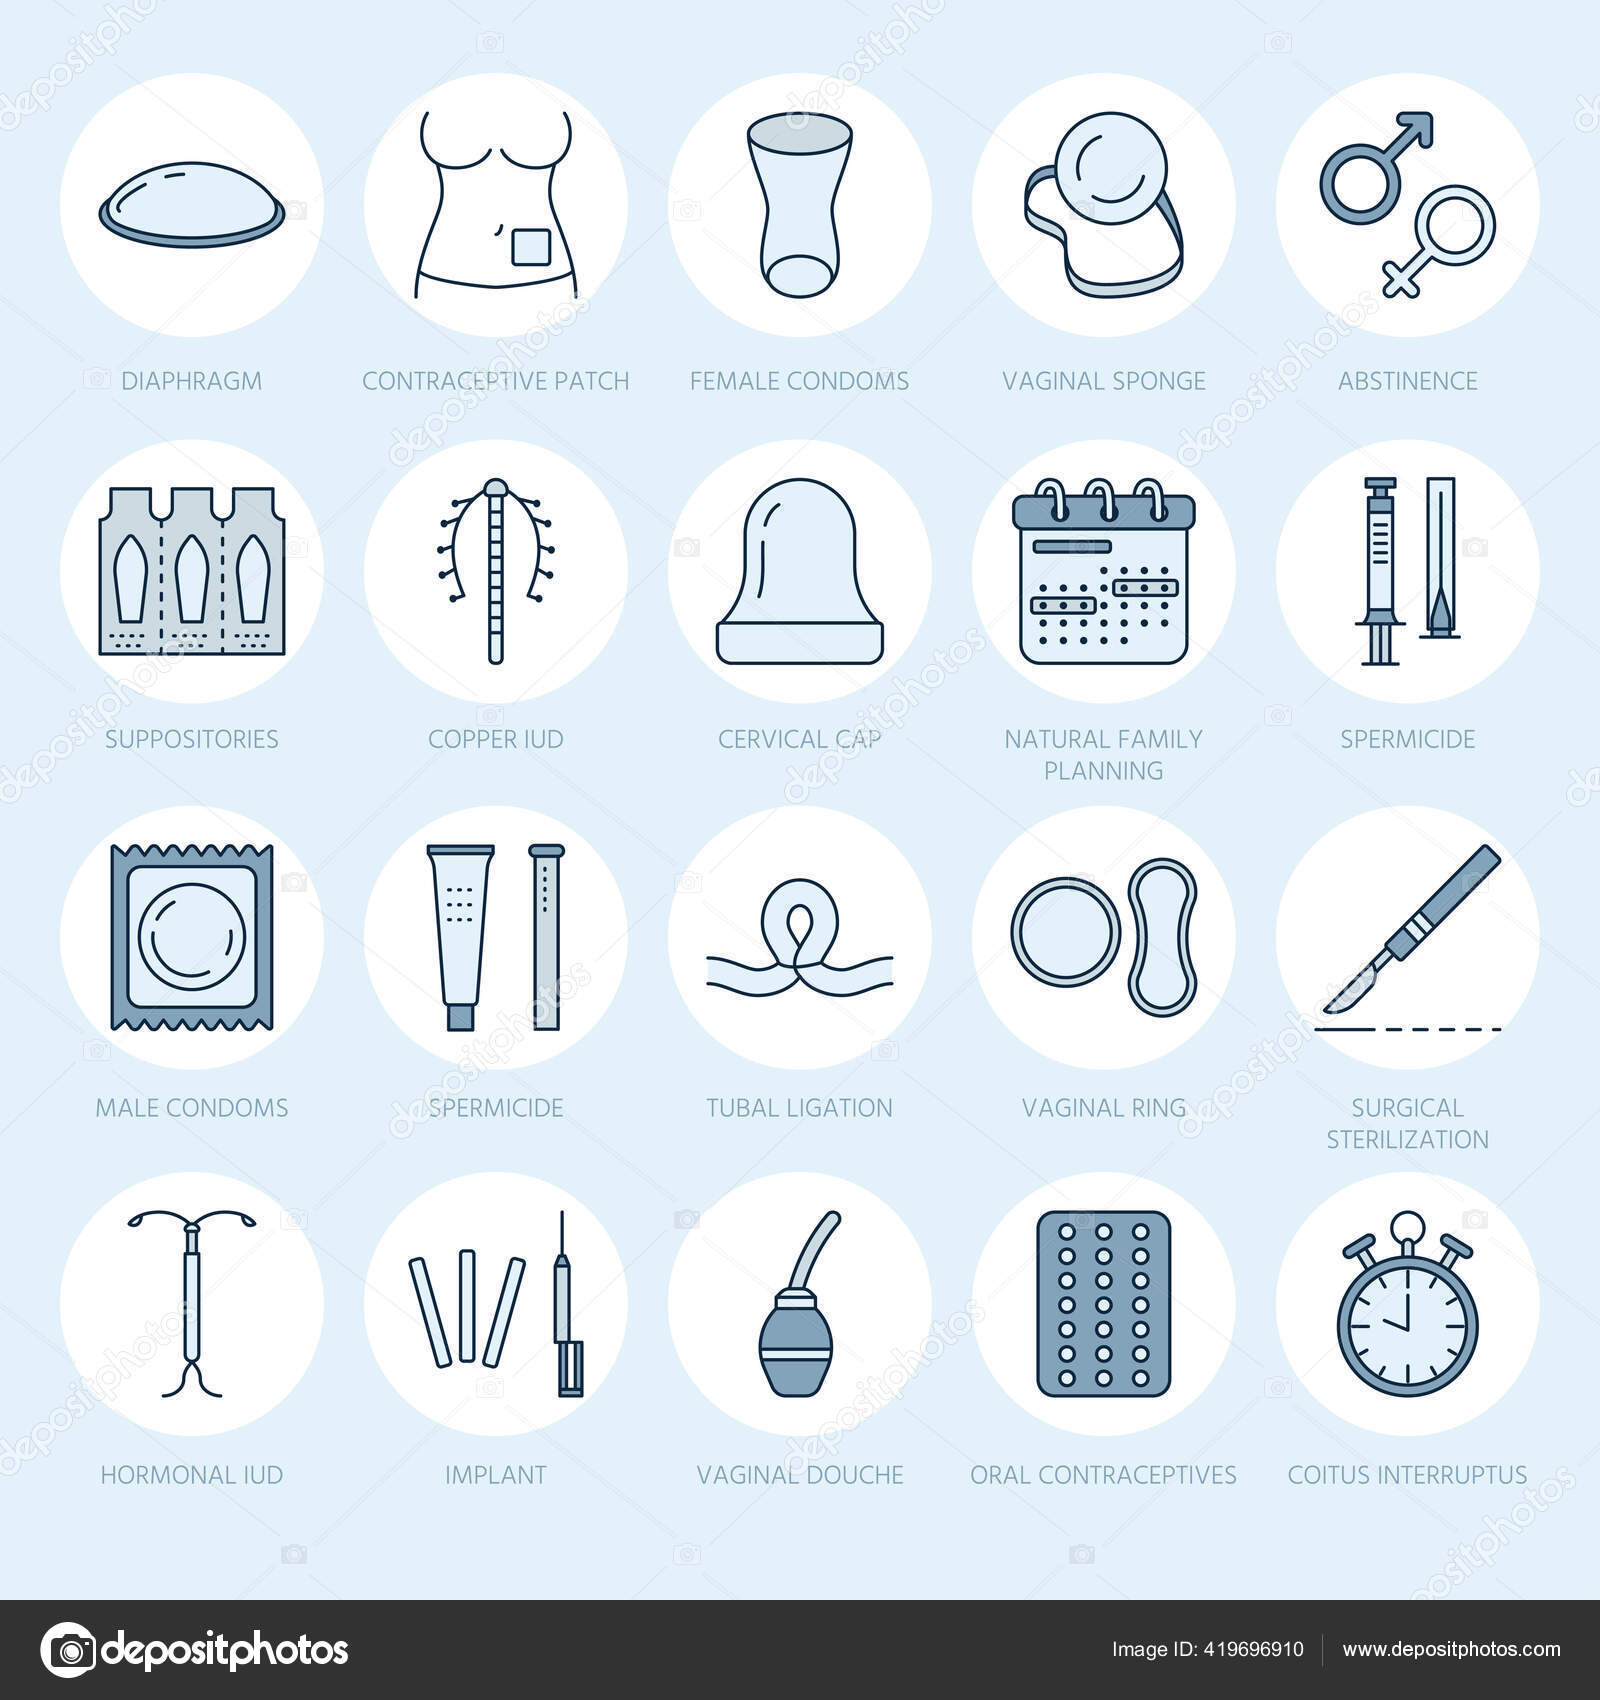 Contraceptives Set Cartoon Vector. Birth Control. Natural Vaginal Ring,  Condom, Iud, Implant, Injection, Diaphragm,patch, Vaginal Douche, Pregnancy  Test, Calendar, Sterilization, Pills, Suppositories. Royalty Free SVG,  Cliparts, Vectors, and Stock ...